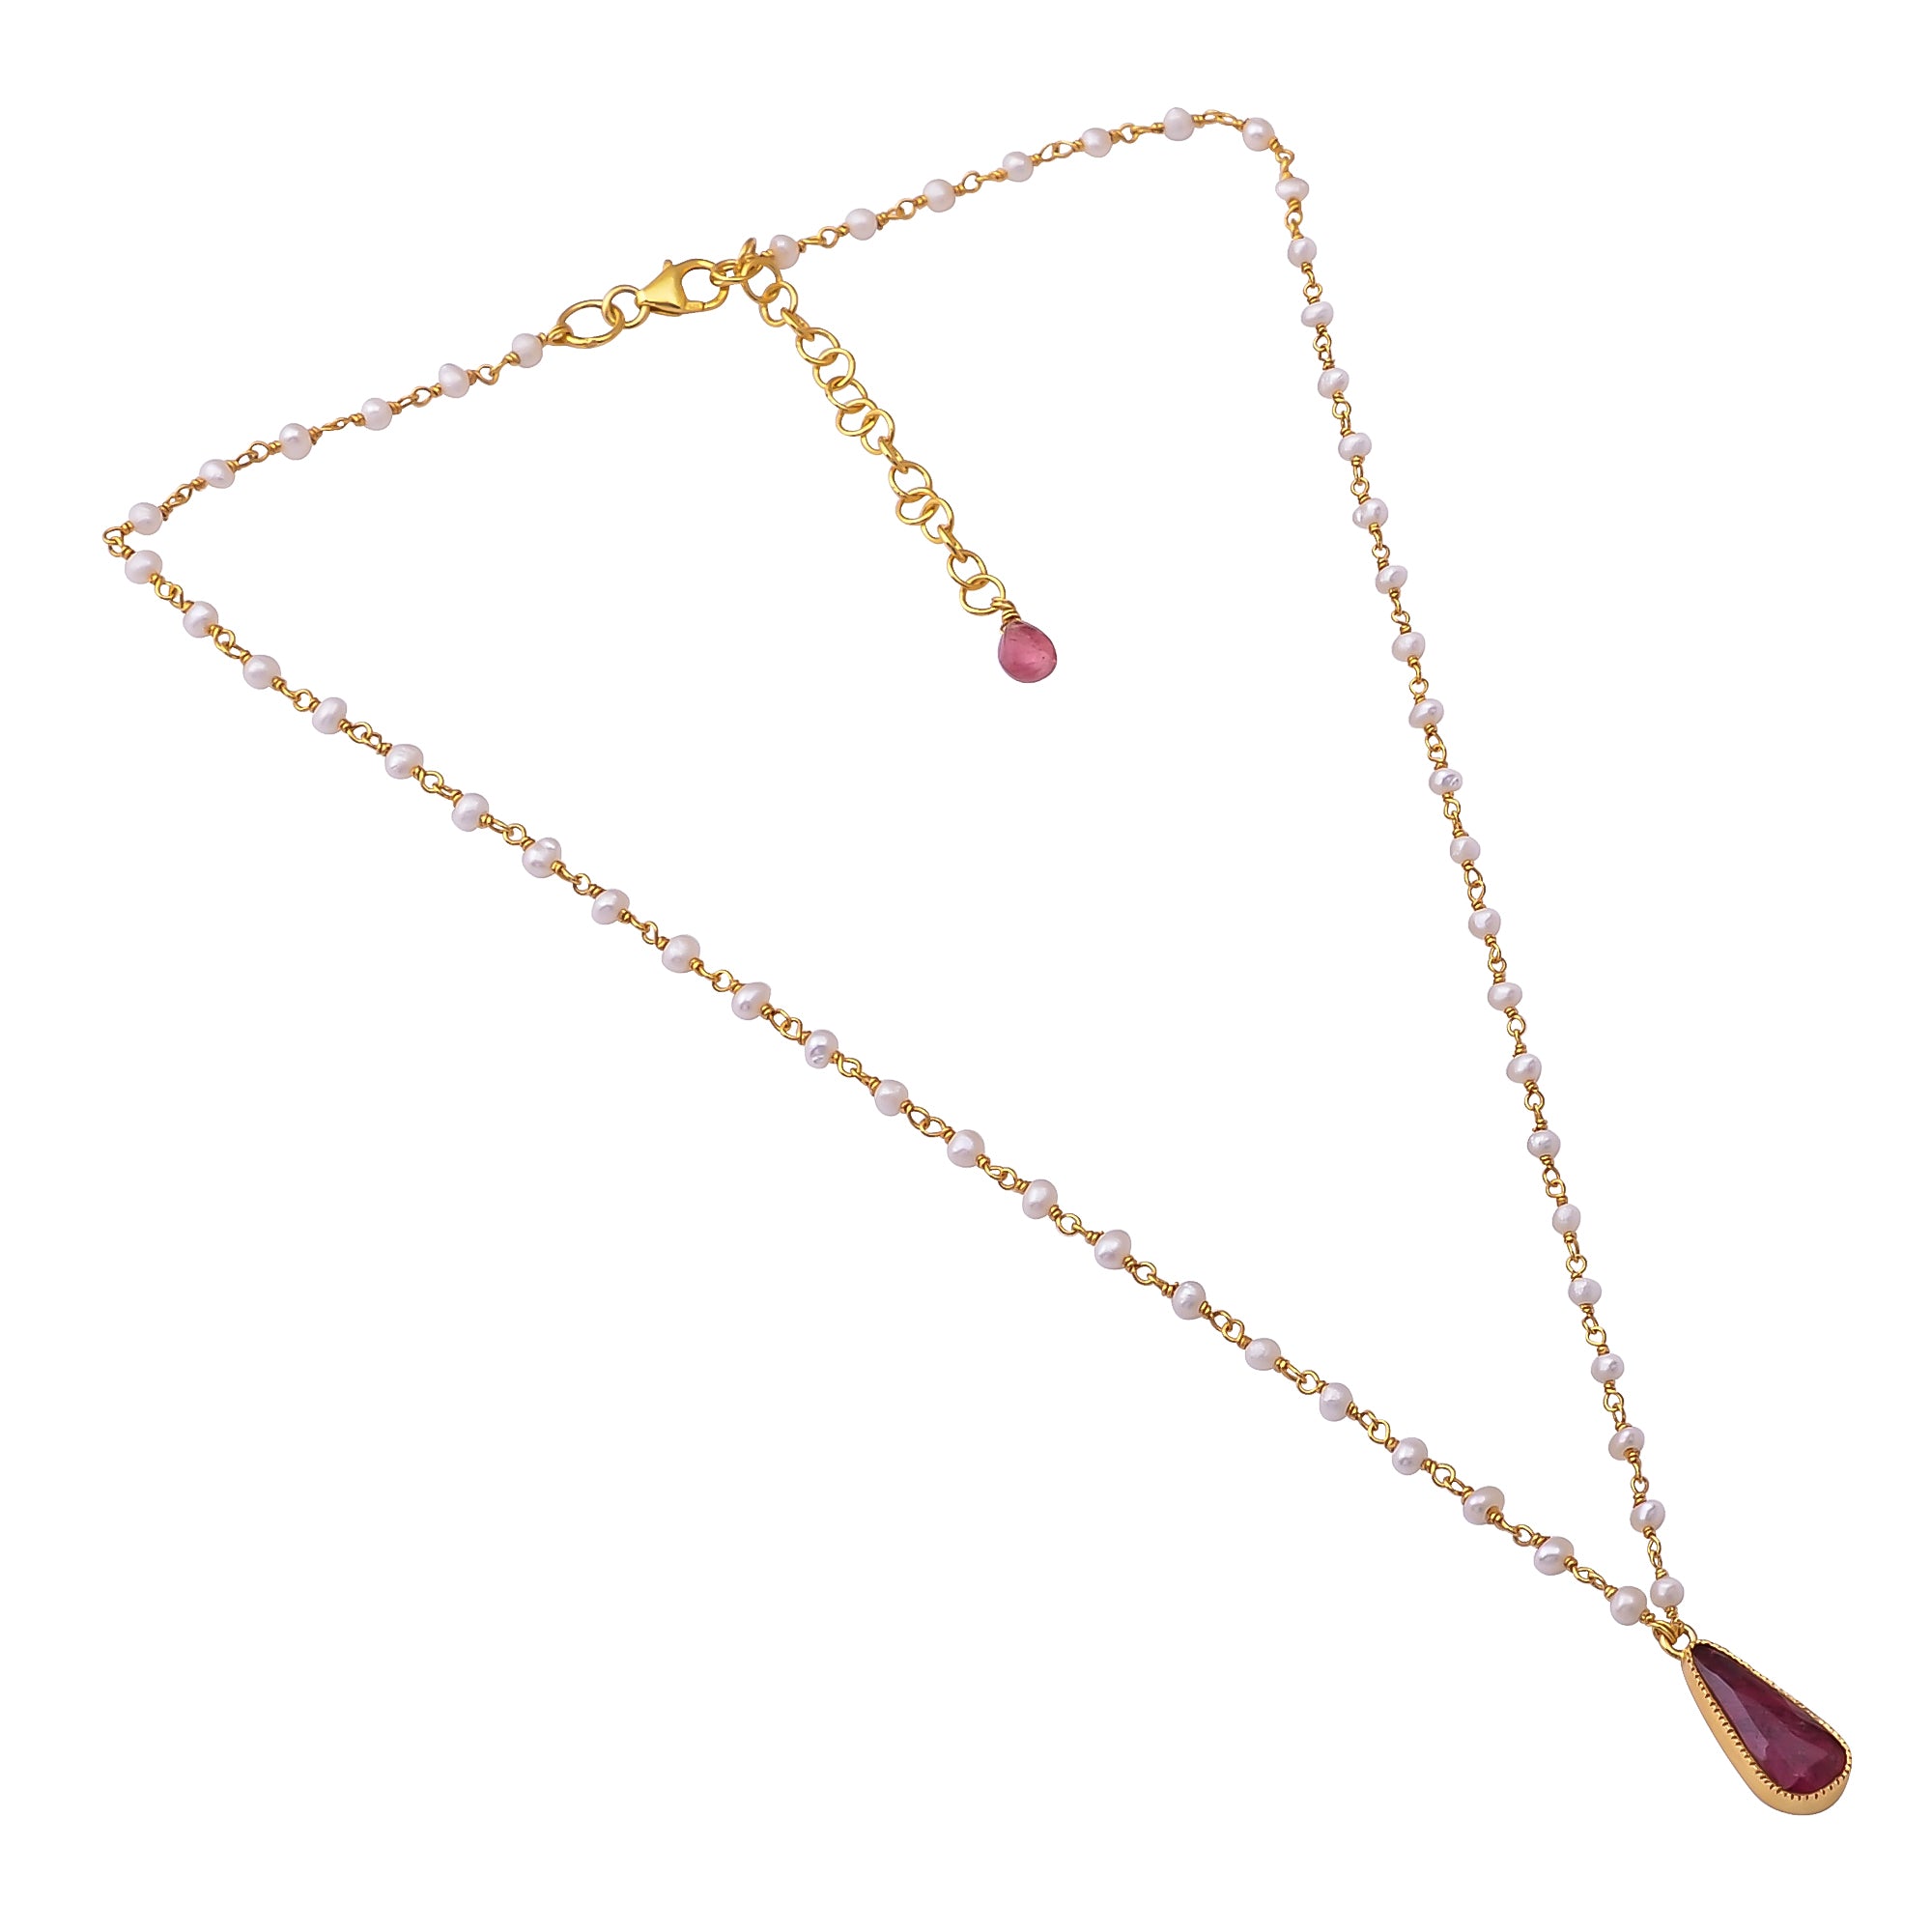 Buy Indian Handcrafted Silver Gold Plated Pink Tourmaline Pendant/pearl Necklace.